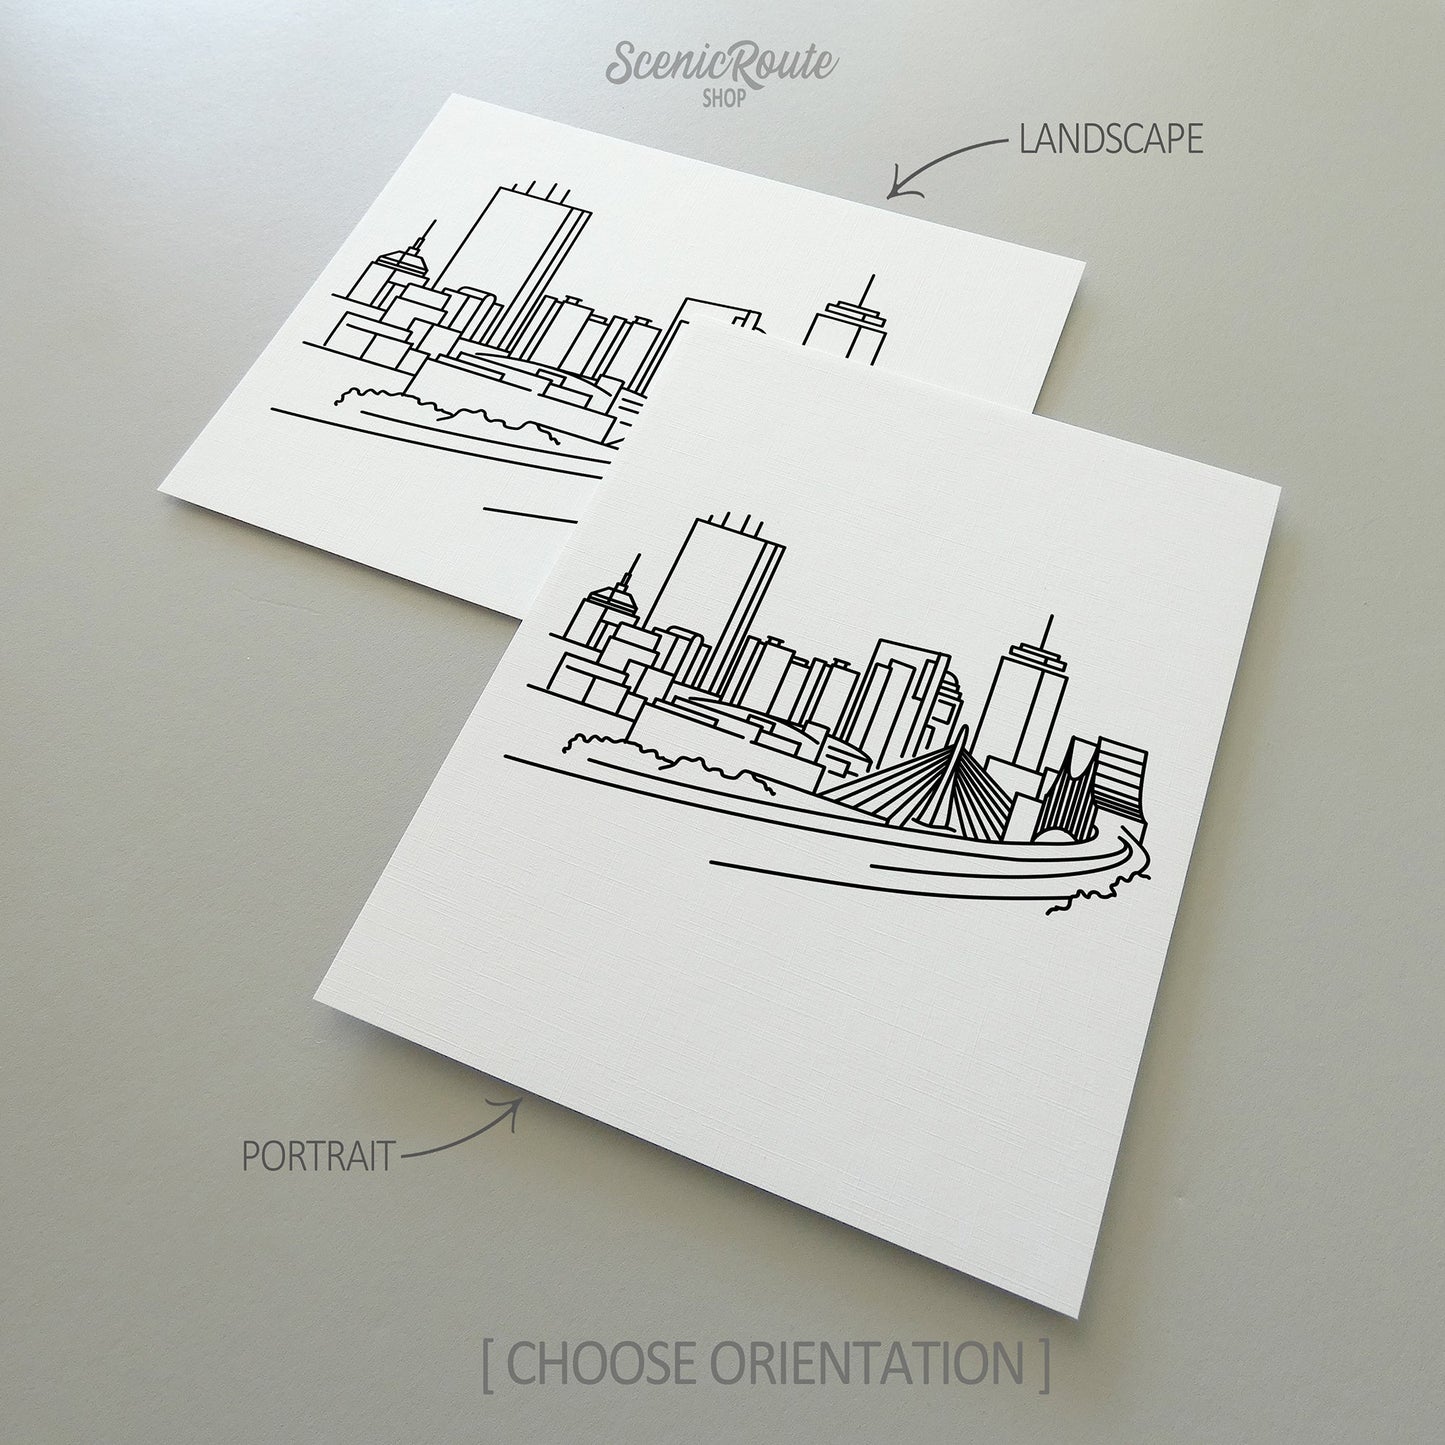 Two line art drawings of the Boston Skyline on white linen paper with a gray background.  The pieces are shown in portrait and landscape orientation for the available art print options.